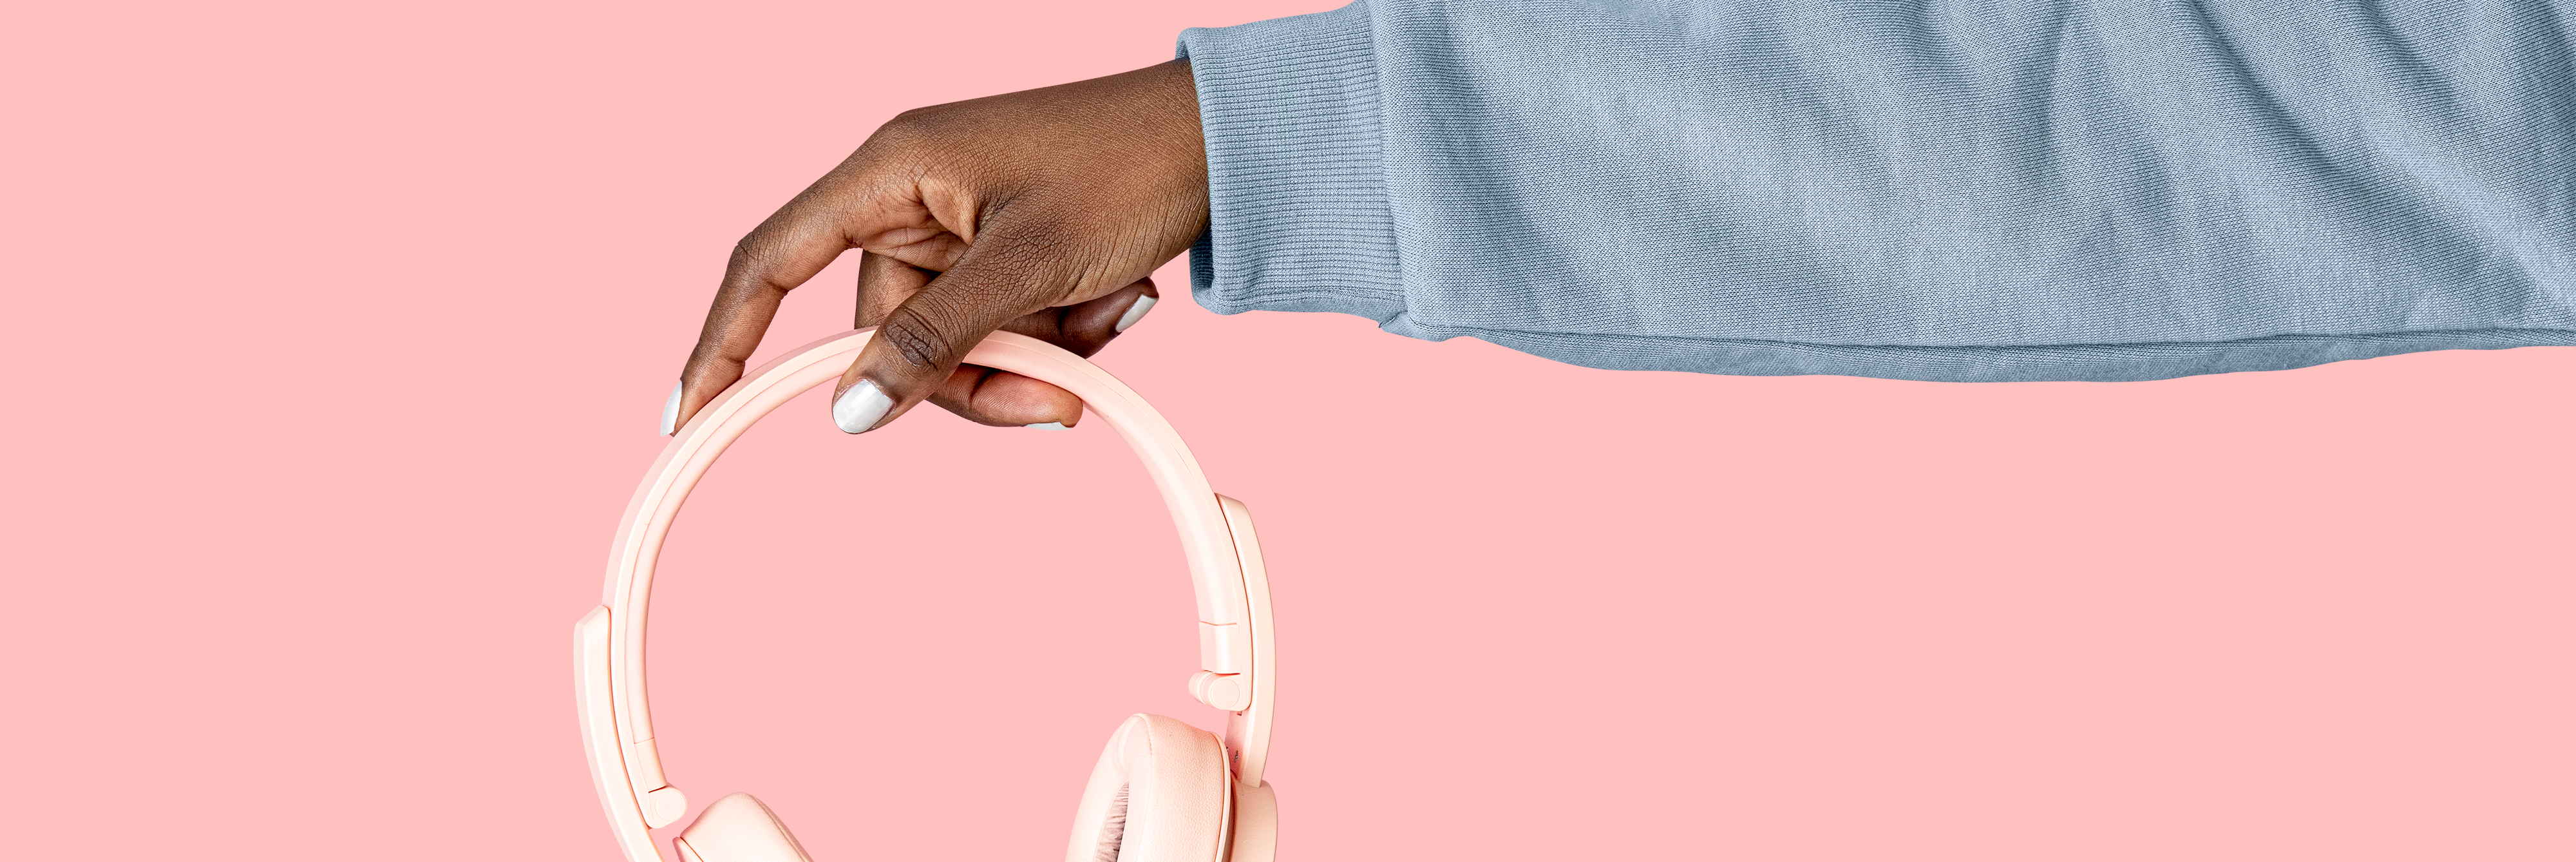 Hand holding headphones against pink backdrop